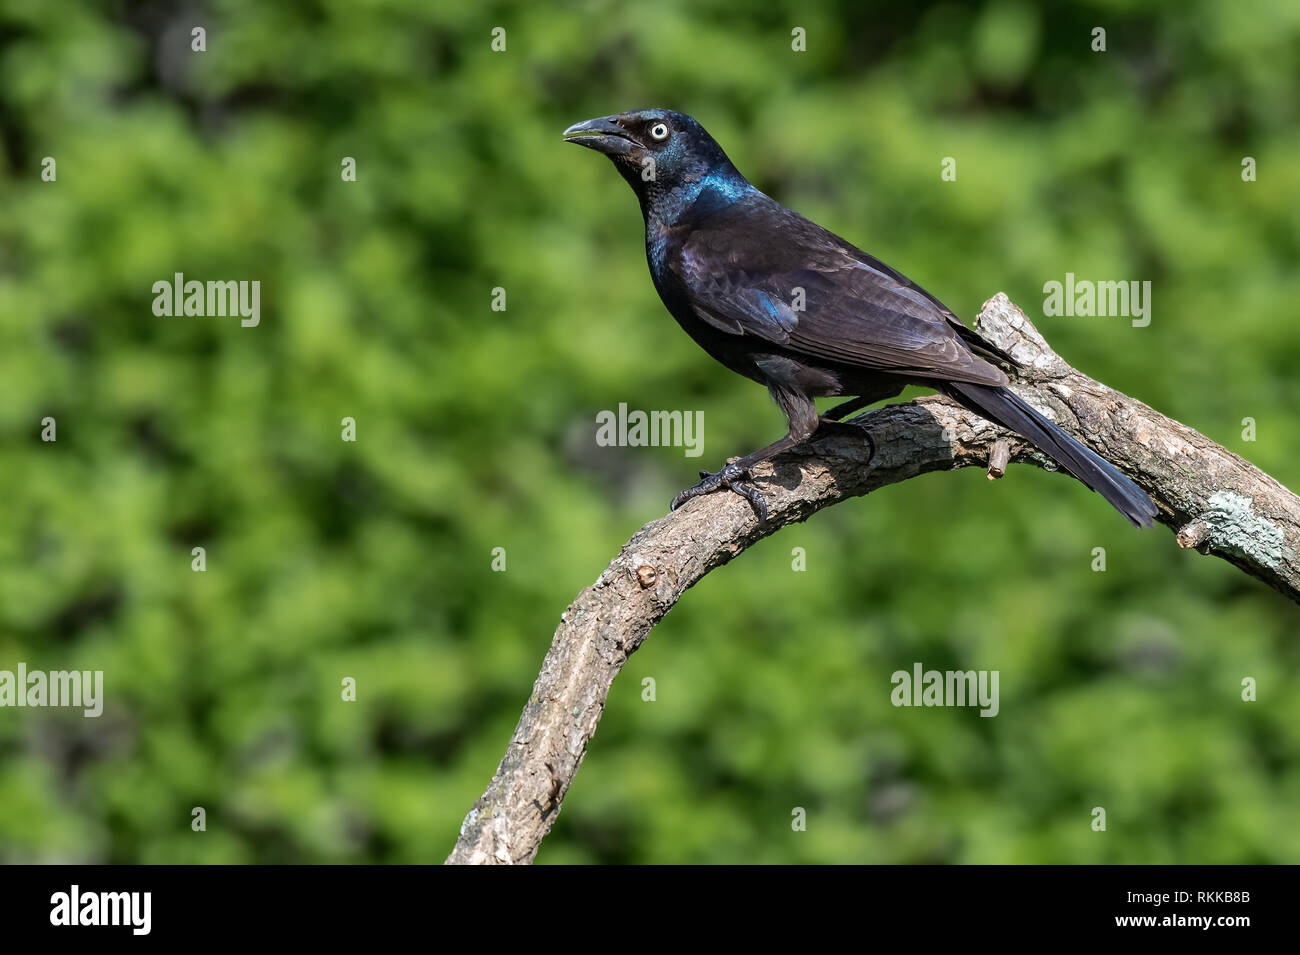 Common Grackle, Quiscalus quiscula, on moss covered log against a natural green forest background Stock Photo